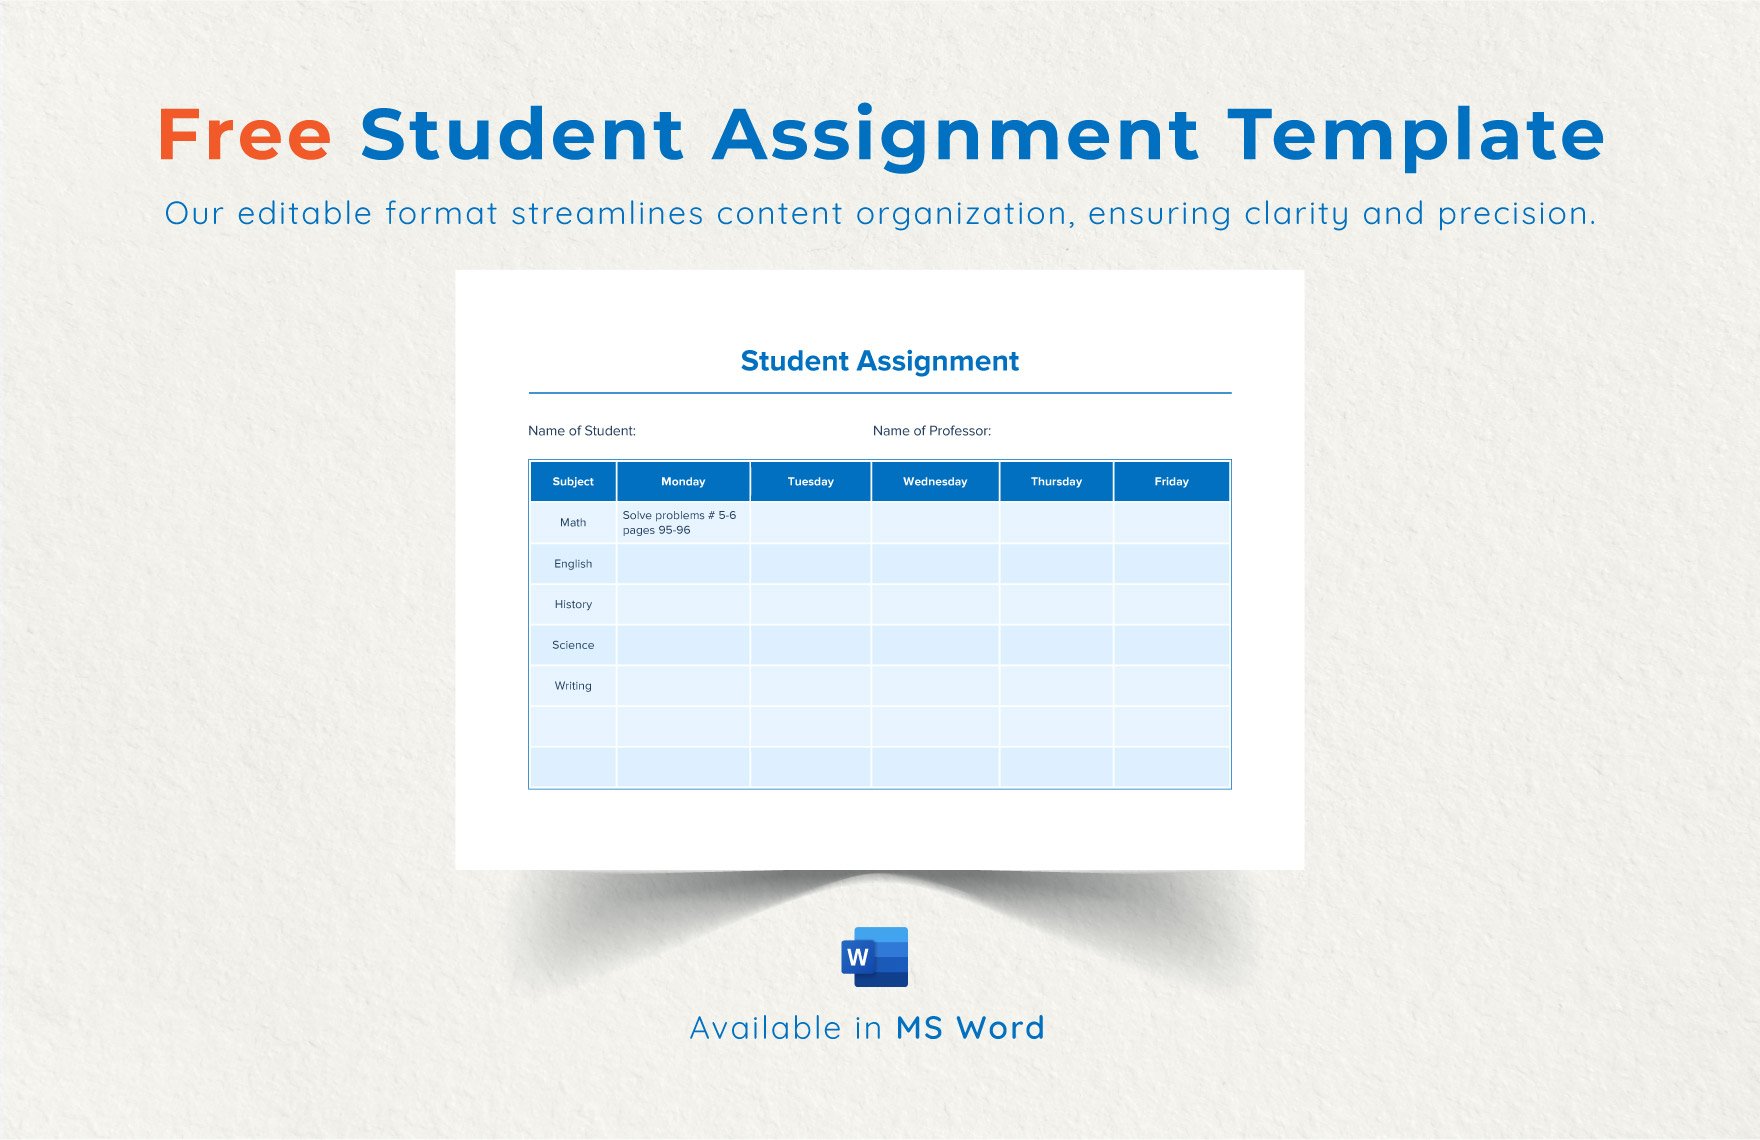 Free Student Assignment Template